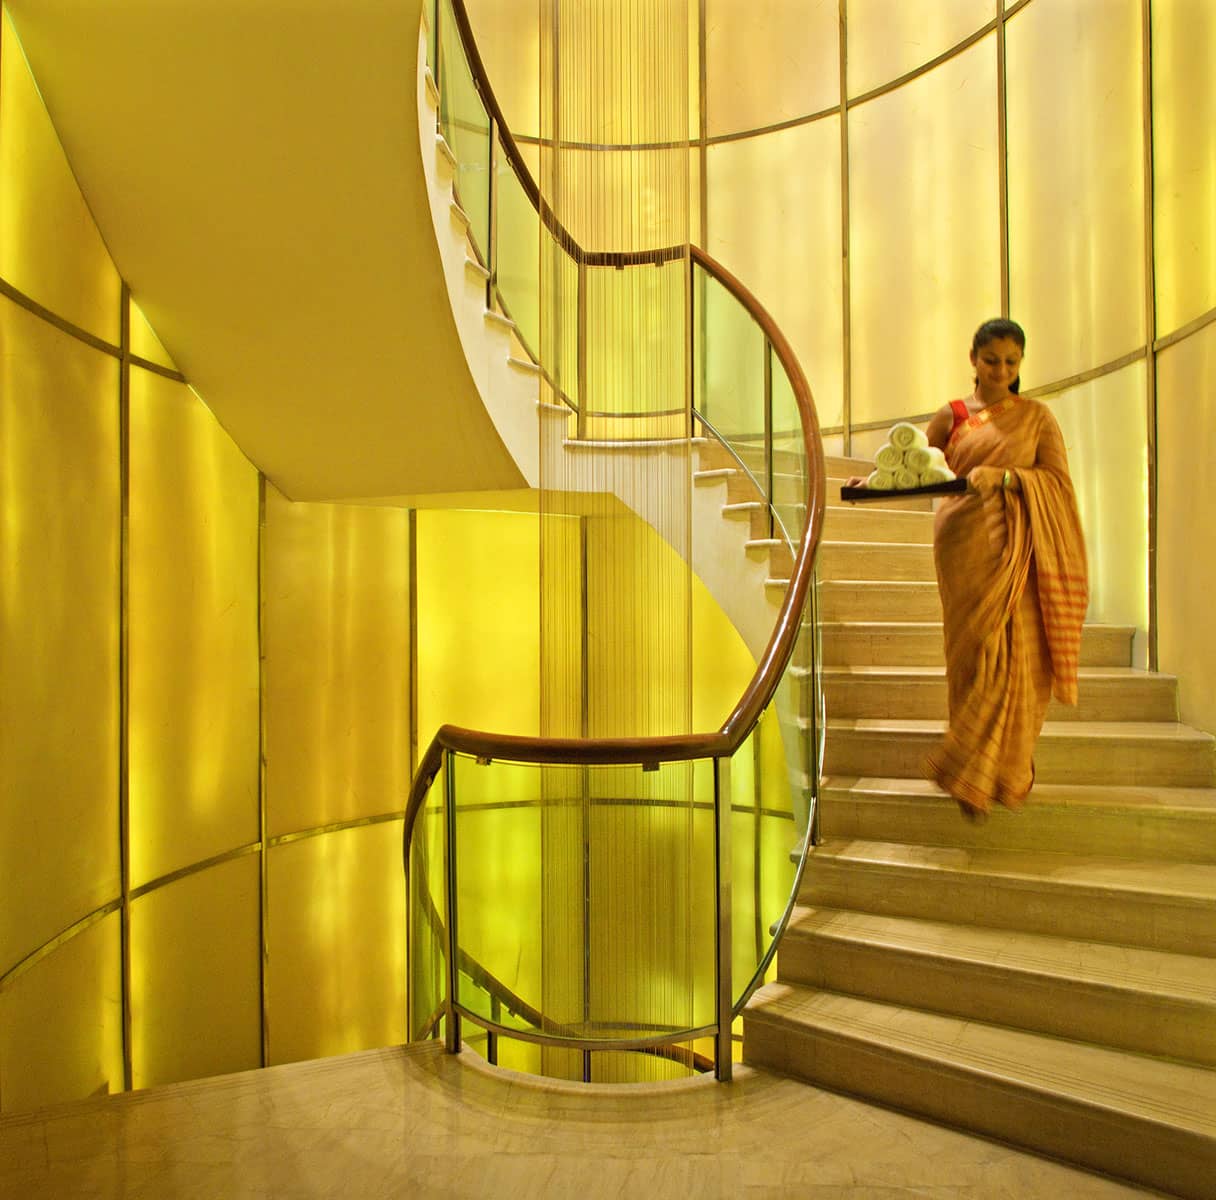 Architecture Photography India: Staircase in five star hotel, New Delhi, India.